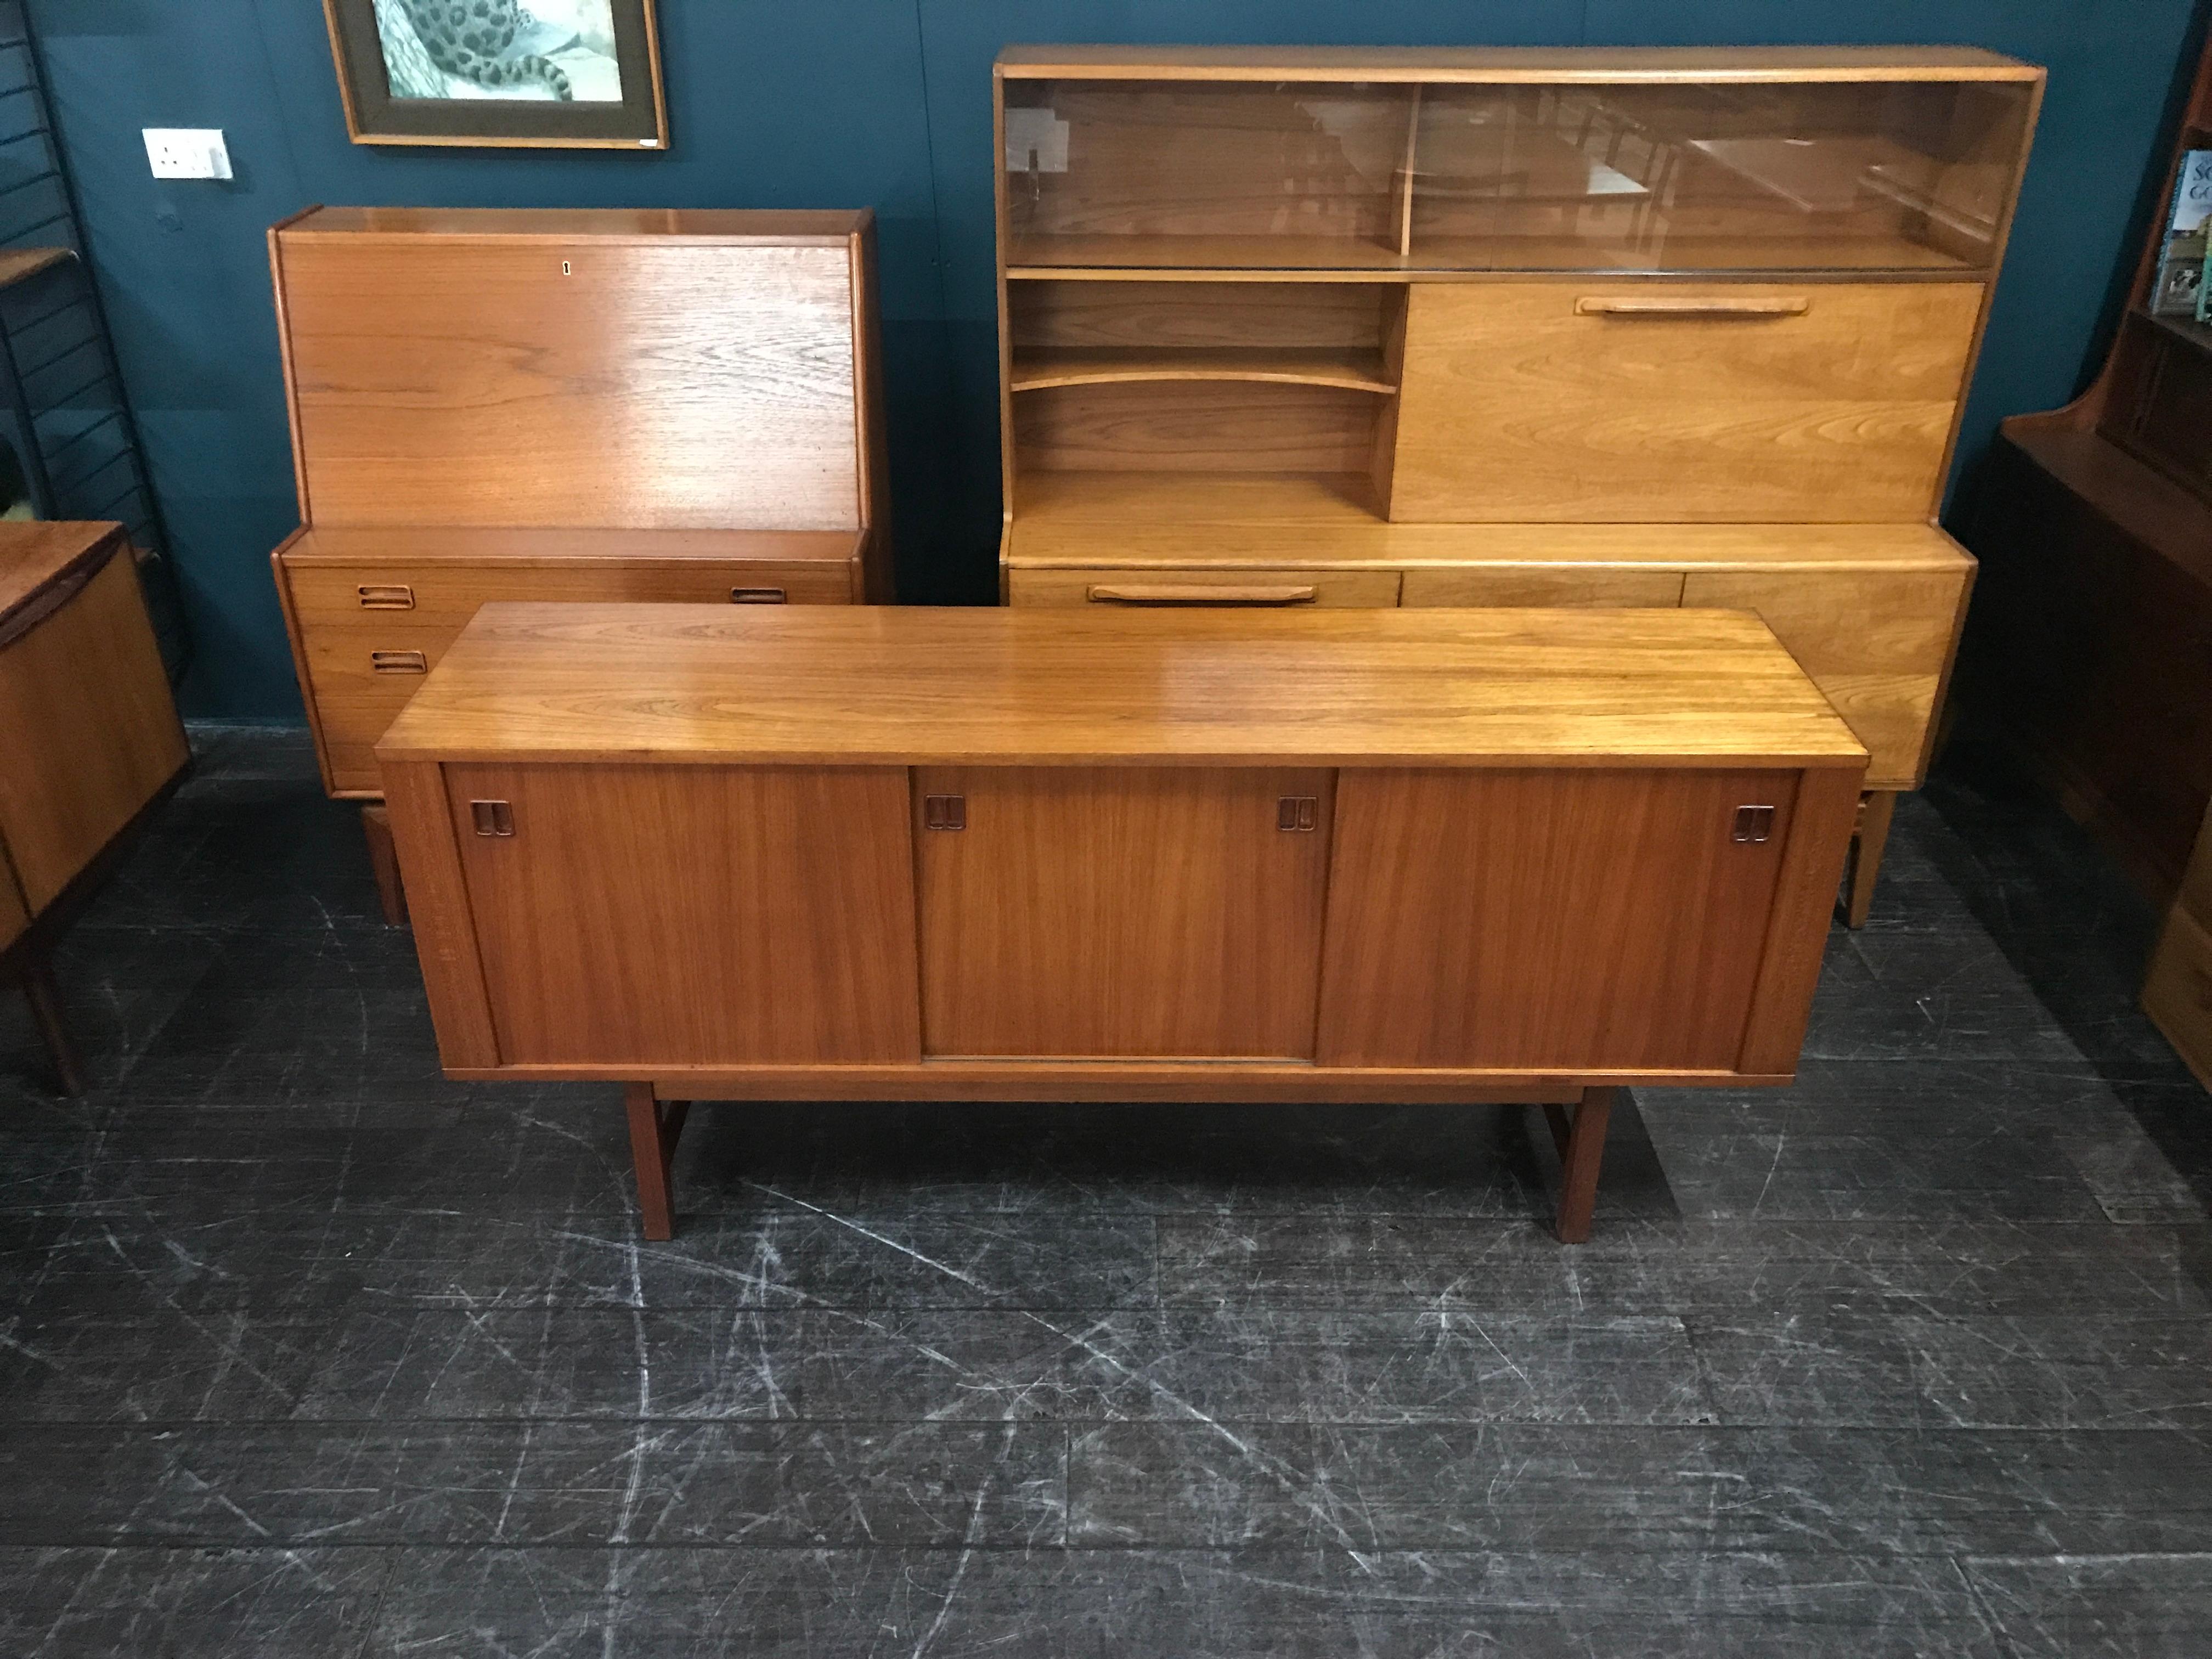 This is a sleek and elegant midcentury Scandinavian sideboard. Very possibly an early Ikea Swedish sideboard. This piece may well be an antique of the future, very similar to the 1960s sideboards that Ikea designed and created, prior to their